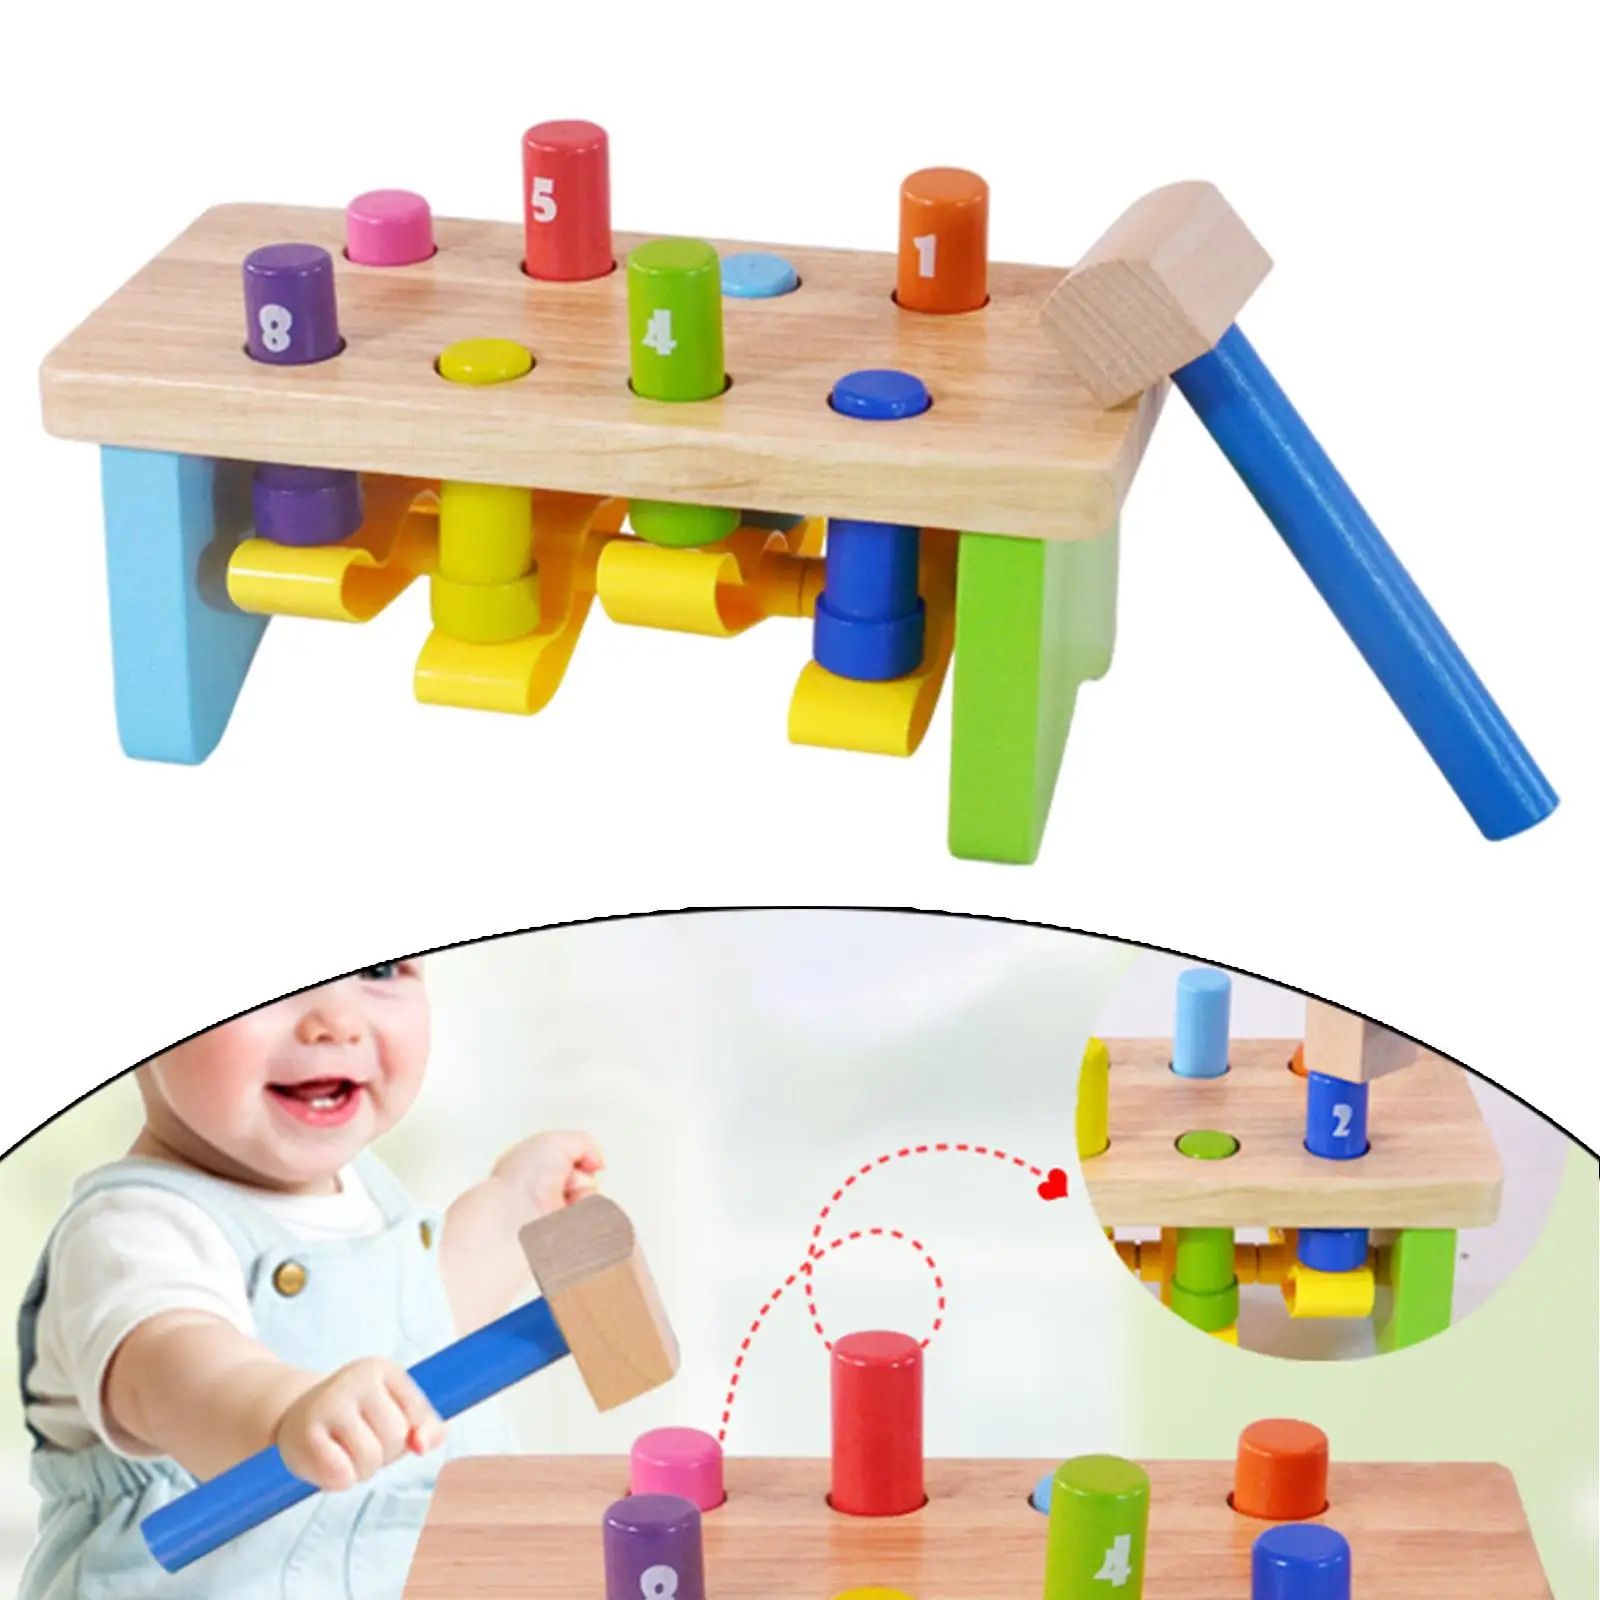 Hammer Wooden Peg Pounding Toy  Tap game for children. HAMMER TOYS for toddlers